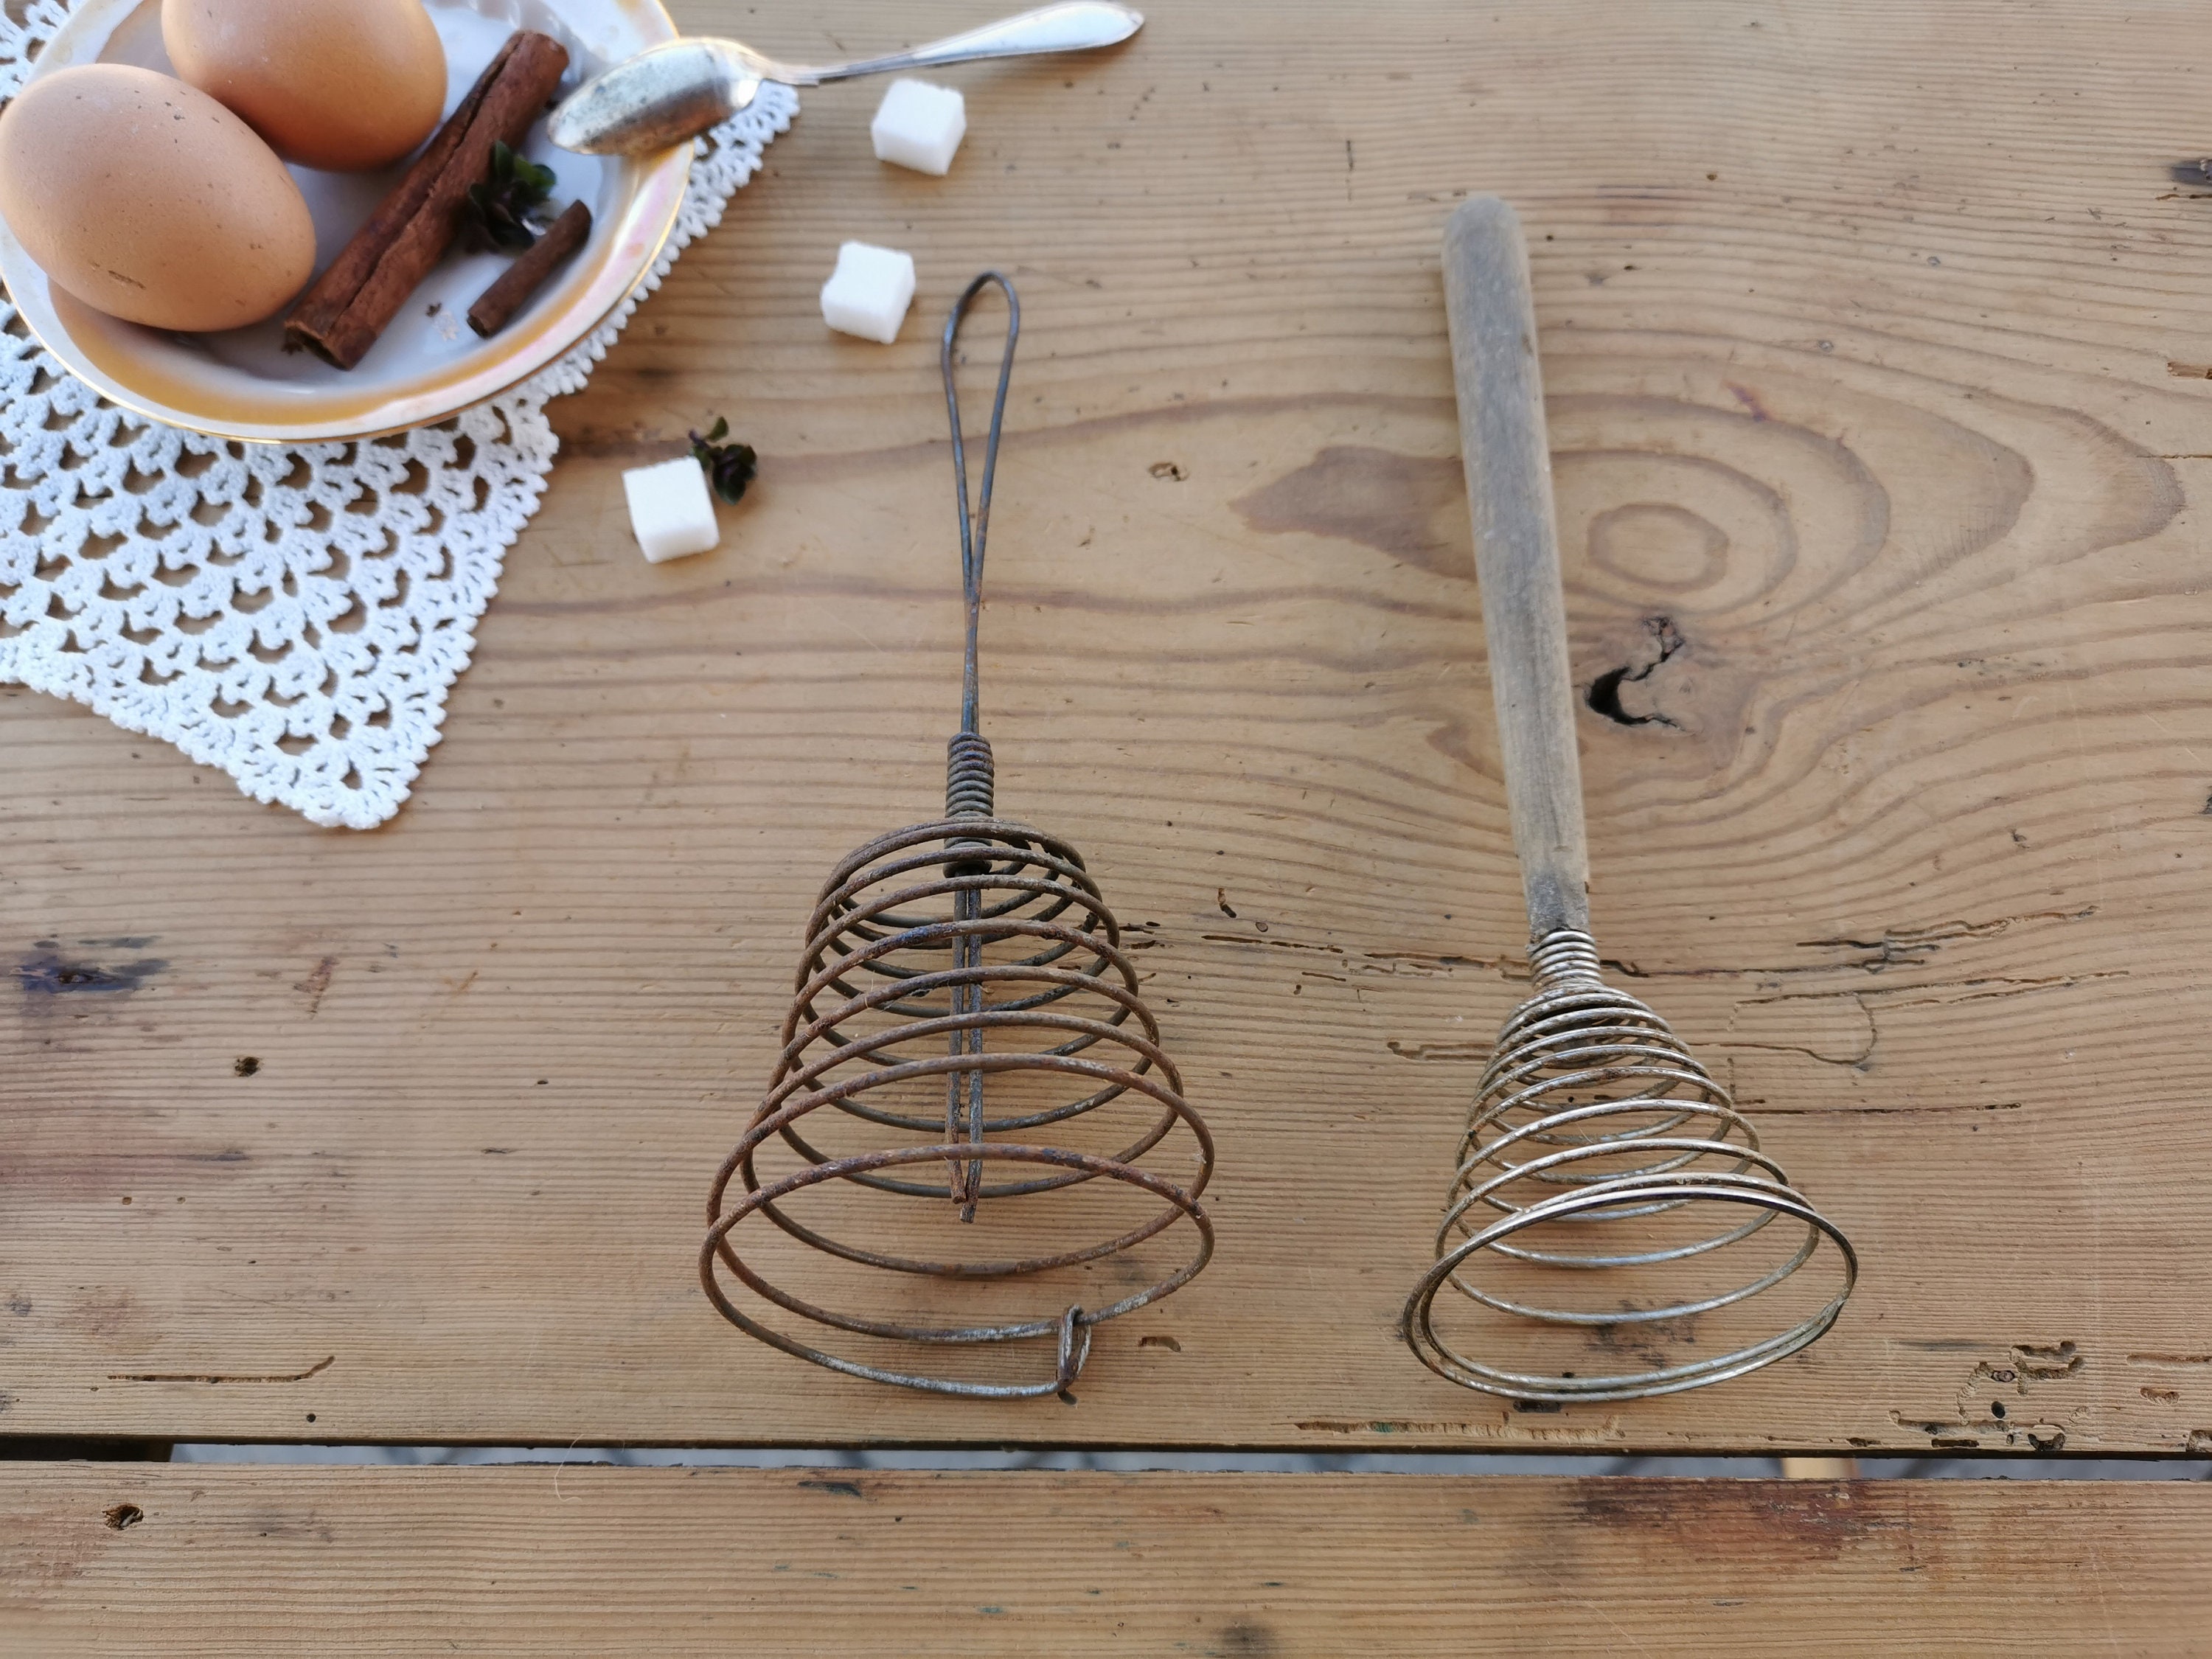 Vintage Spring Coil Stainless Steel Wire Whisk Egg Beater 8 